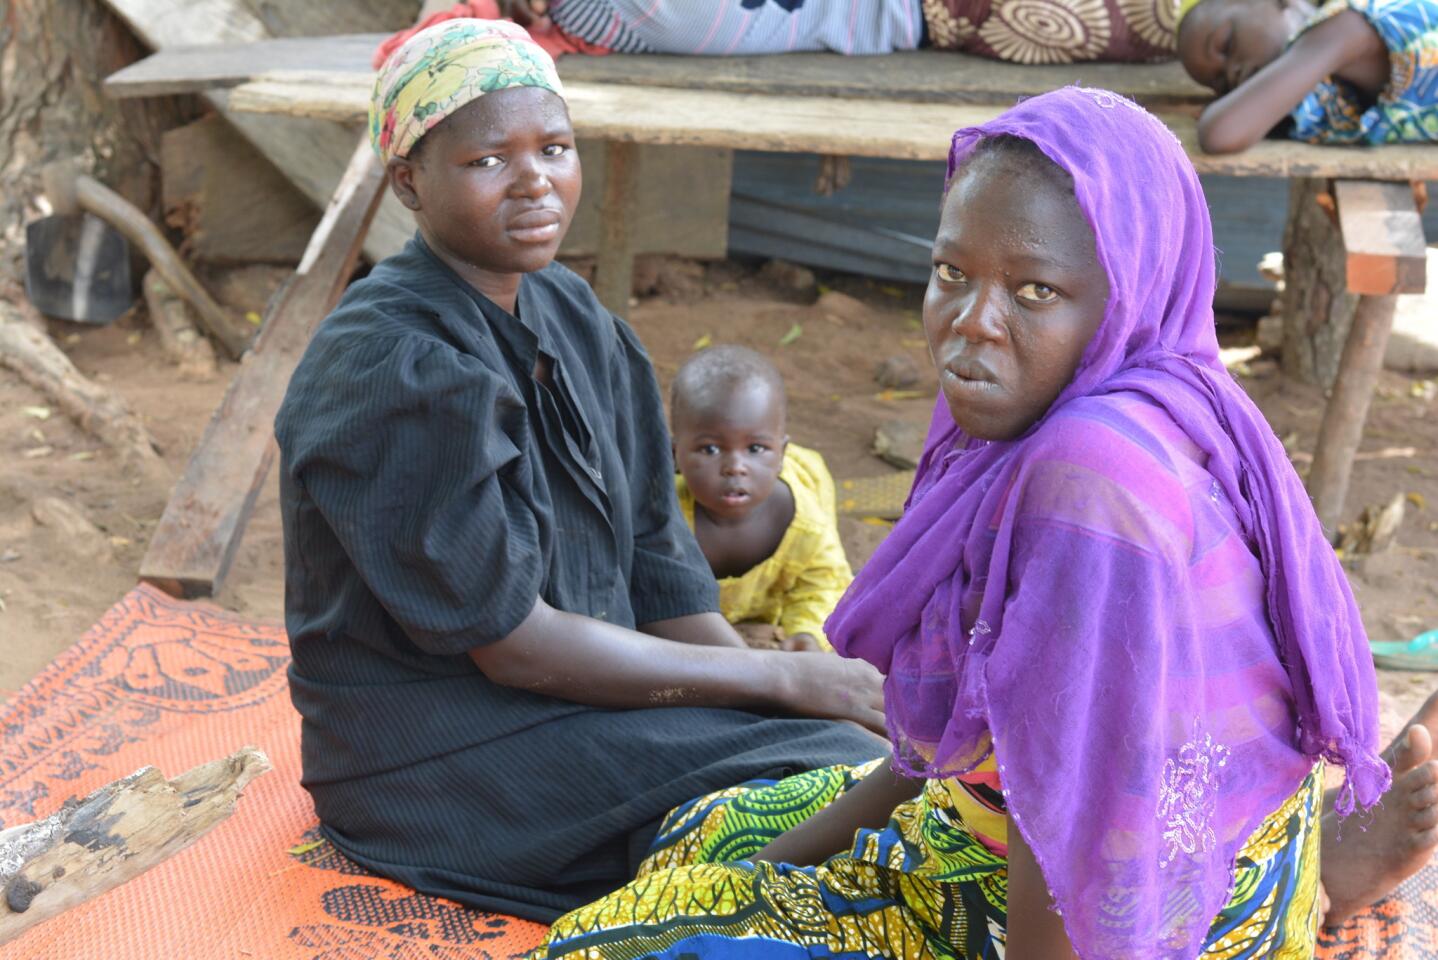 Two refugee women, forced to flee their homes in north eastern Nigeria after attacks by Boko Haram.